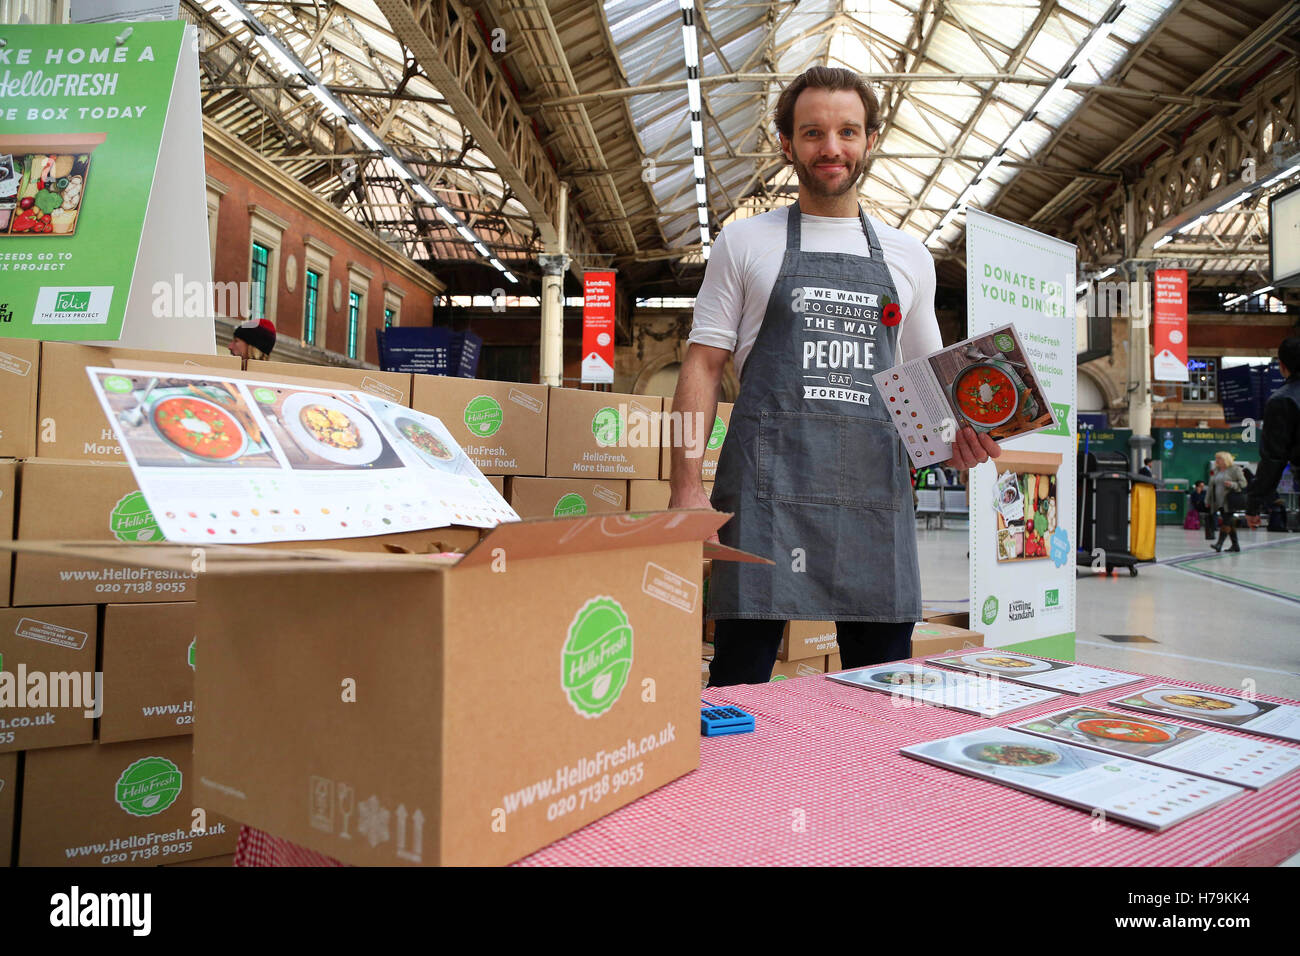 EDITORIAL USE ONLY Chef Patrick Drake gives commuters recipe boxs from food delivery service HelloFresh, to raise money for food waste charity The Felix Project at Victoria Station, London. Stock Photo